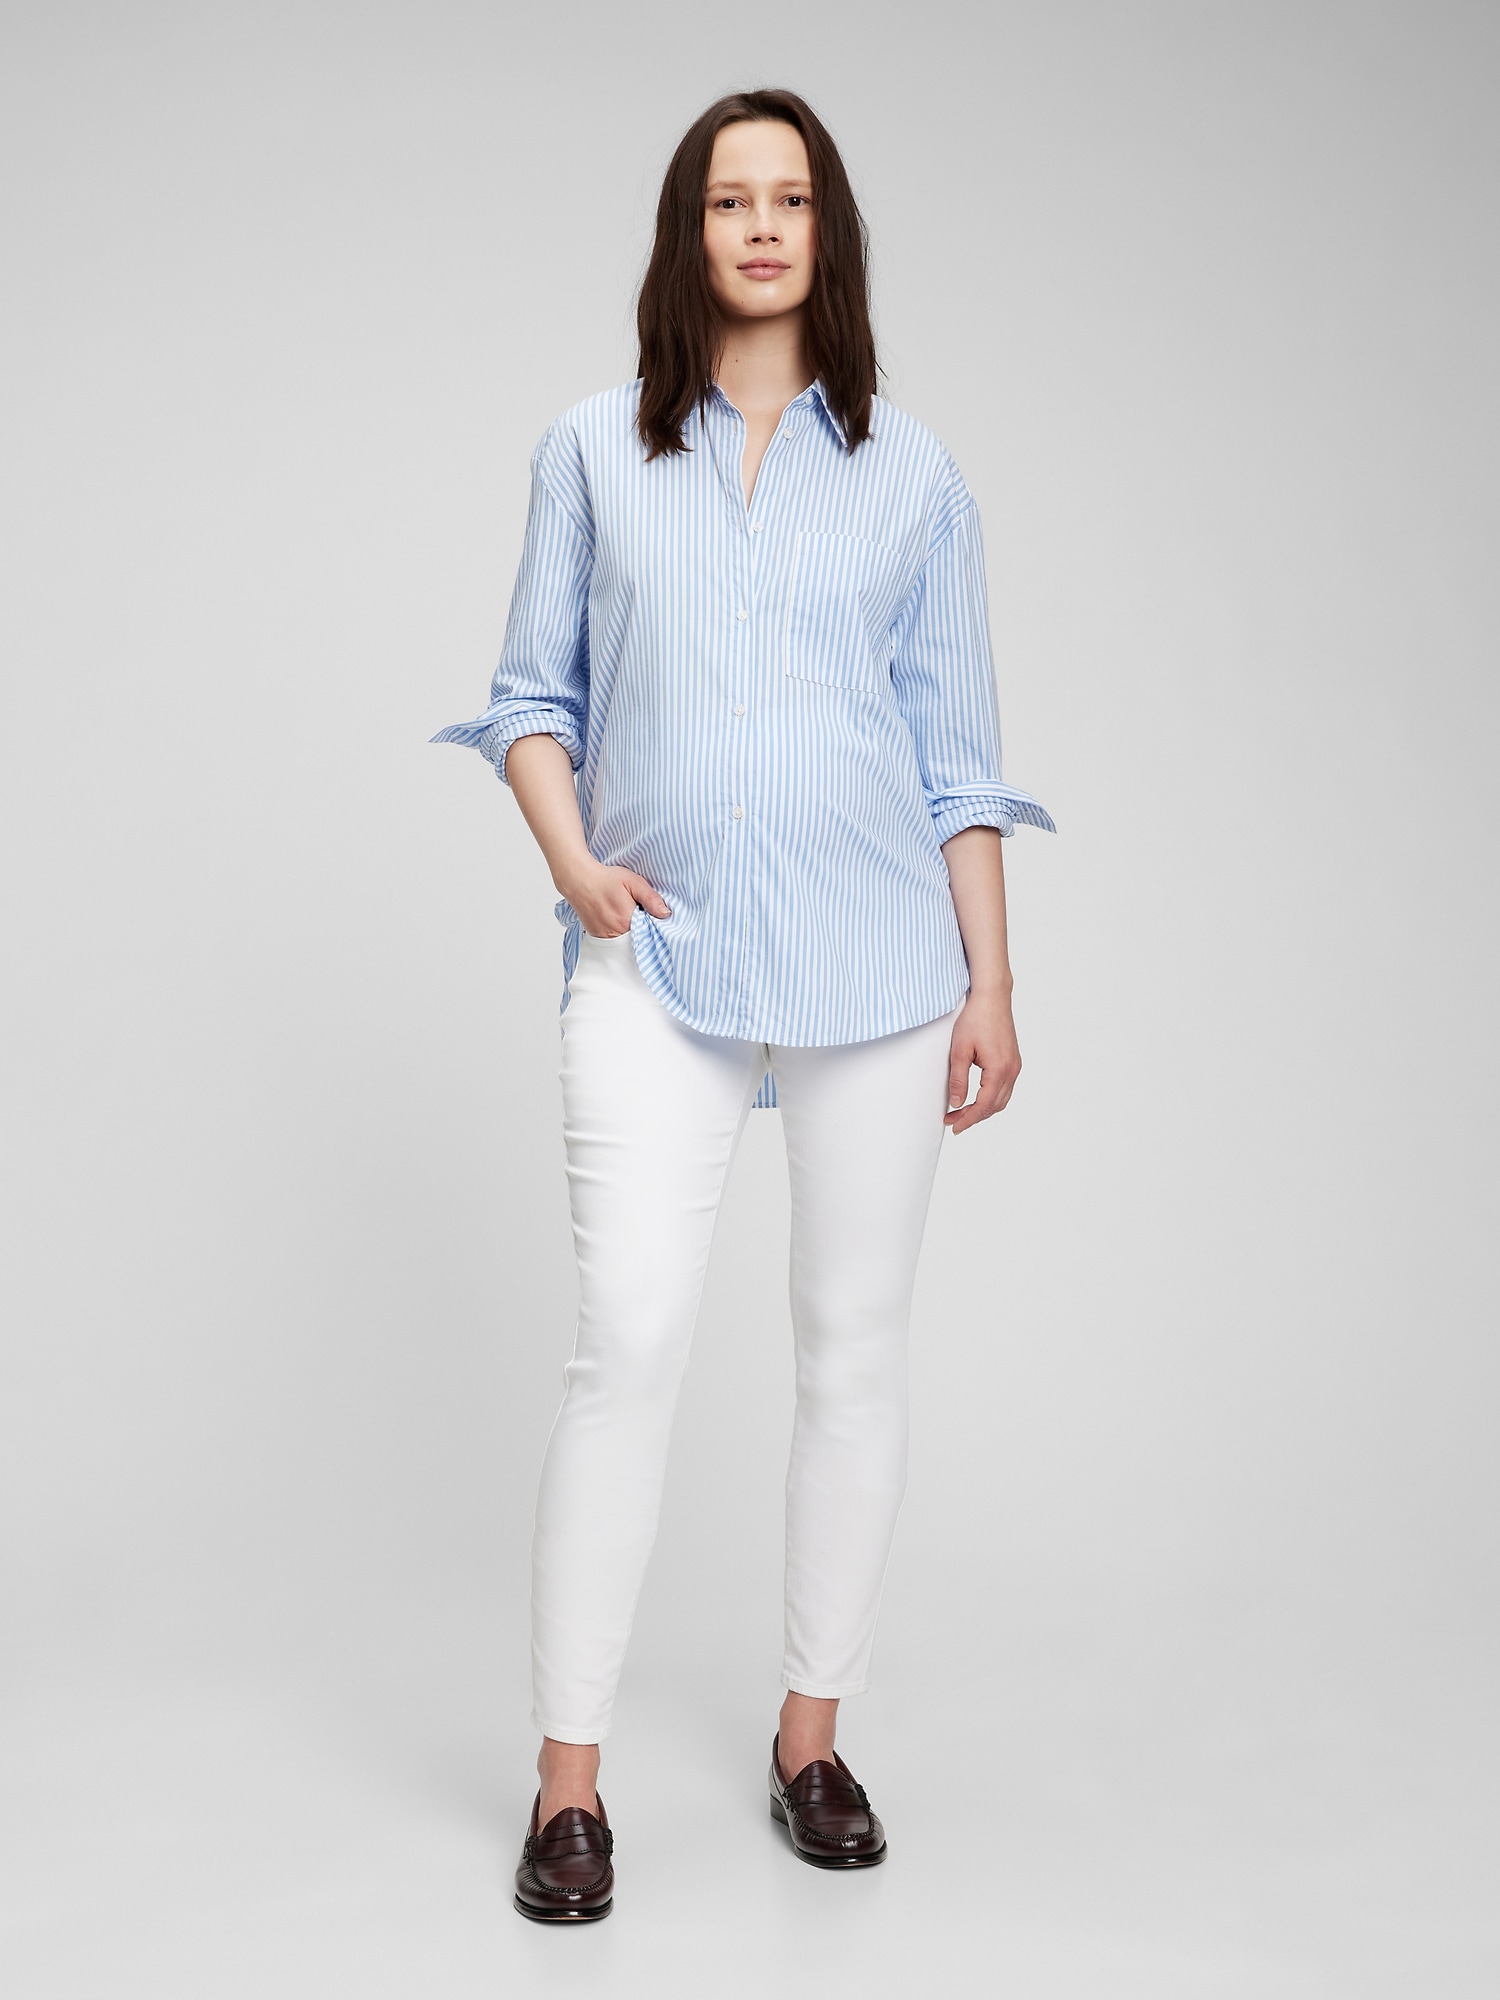 Gap Maternity Full Panel Skinny Jeans with Washwell